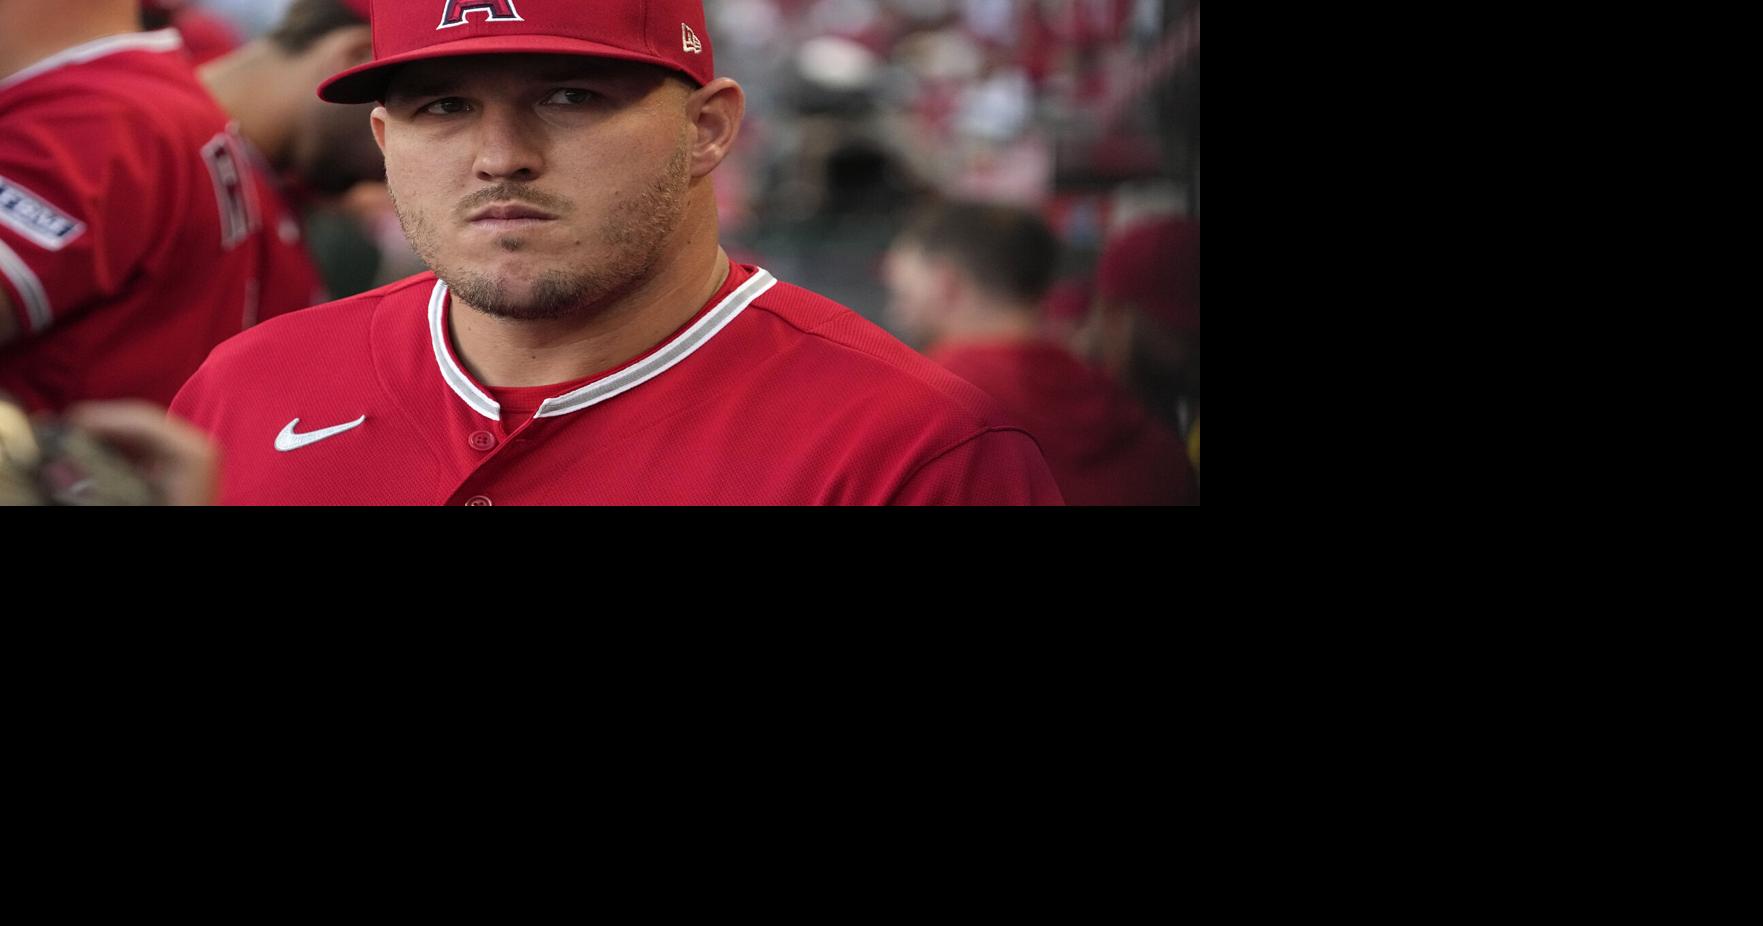 Mike Trout - What it's all about!!